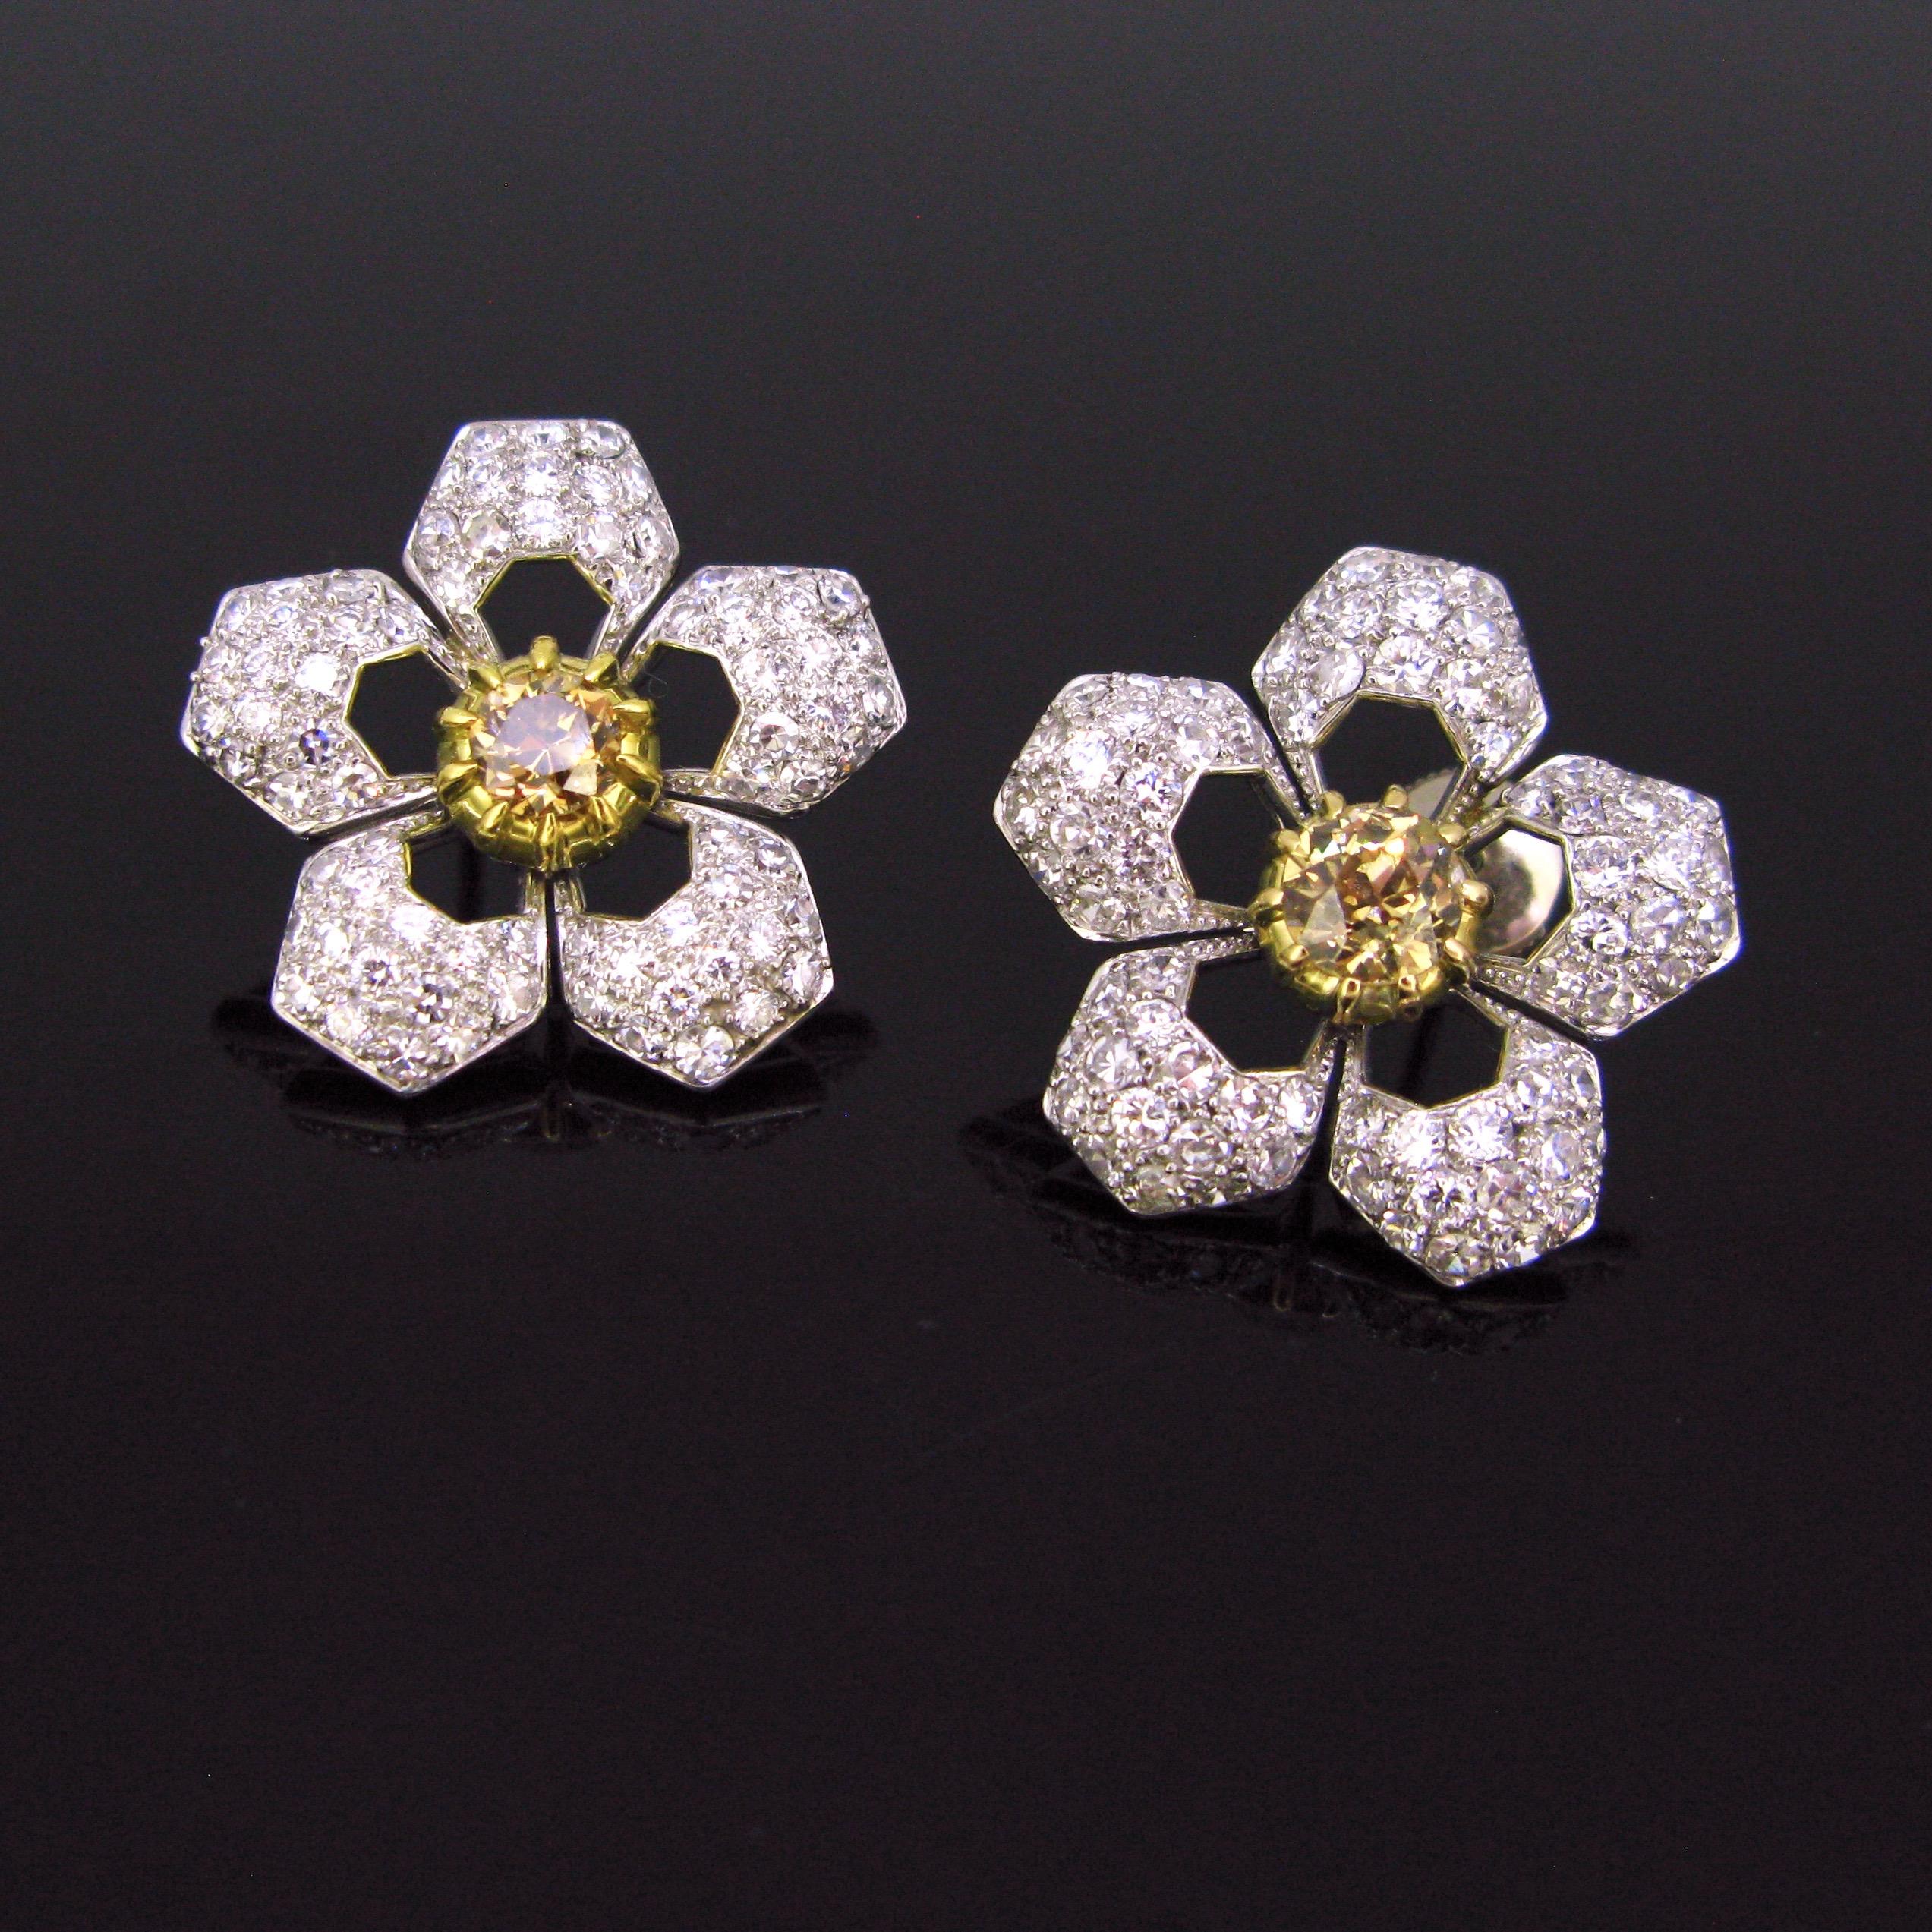 This pair of earrings is adorned with a champagne diamond in its centre. They have a deep yellowish brown colour and they weigh around 1ct each. The petals of the flower are adorned with white and sparkly brilliant cut diamonds (75 diamonds per